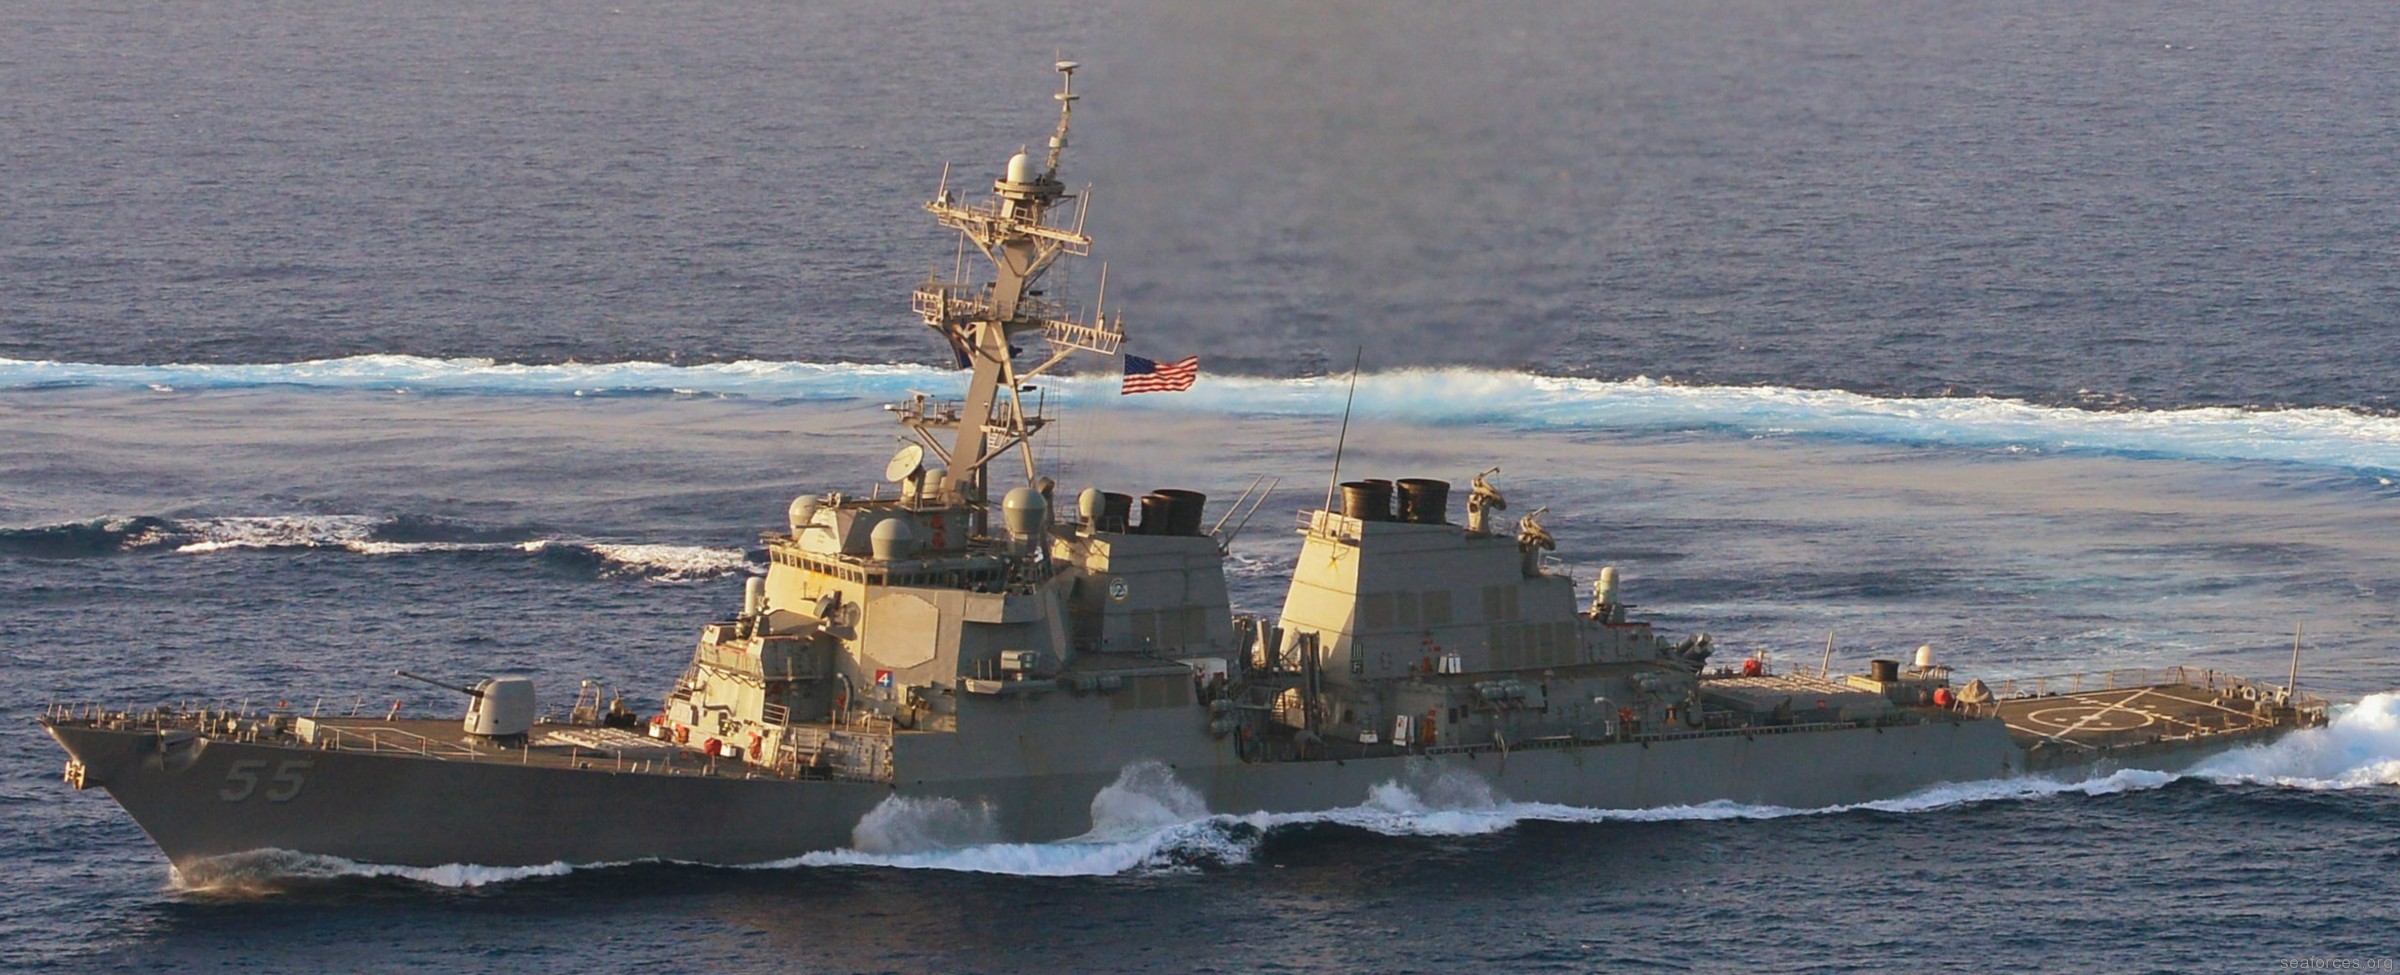 ddg-55 uss stout guided missile destroyer us navy 61